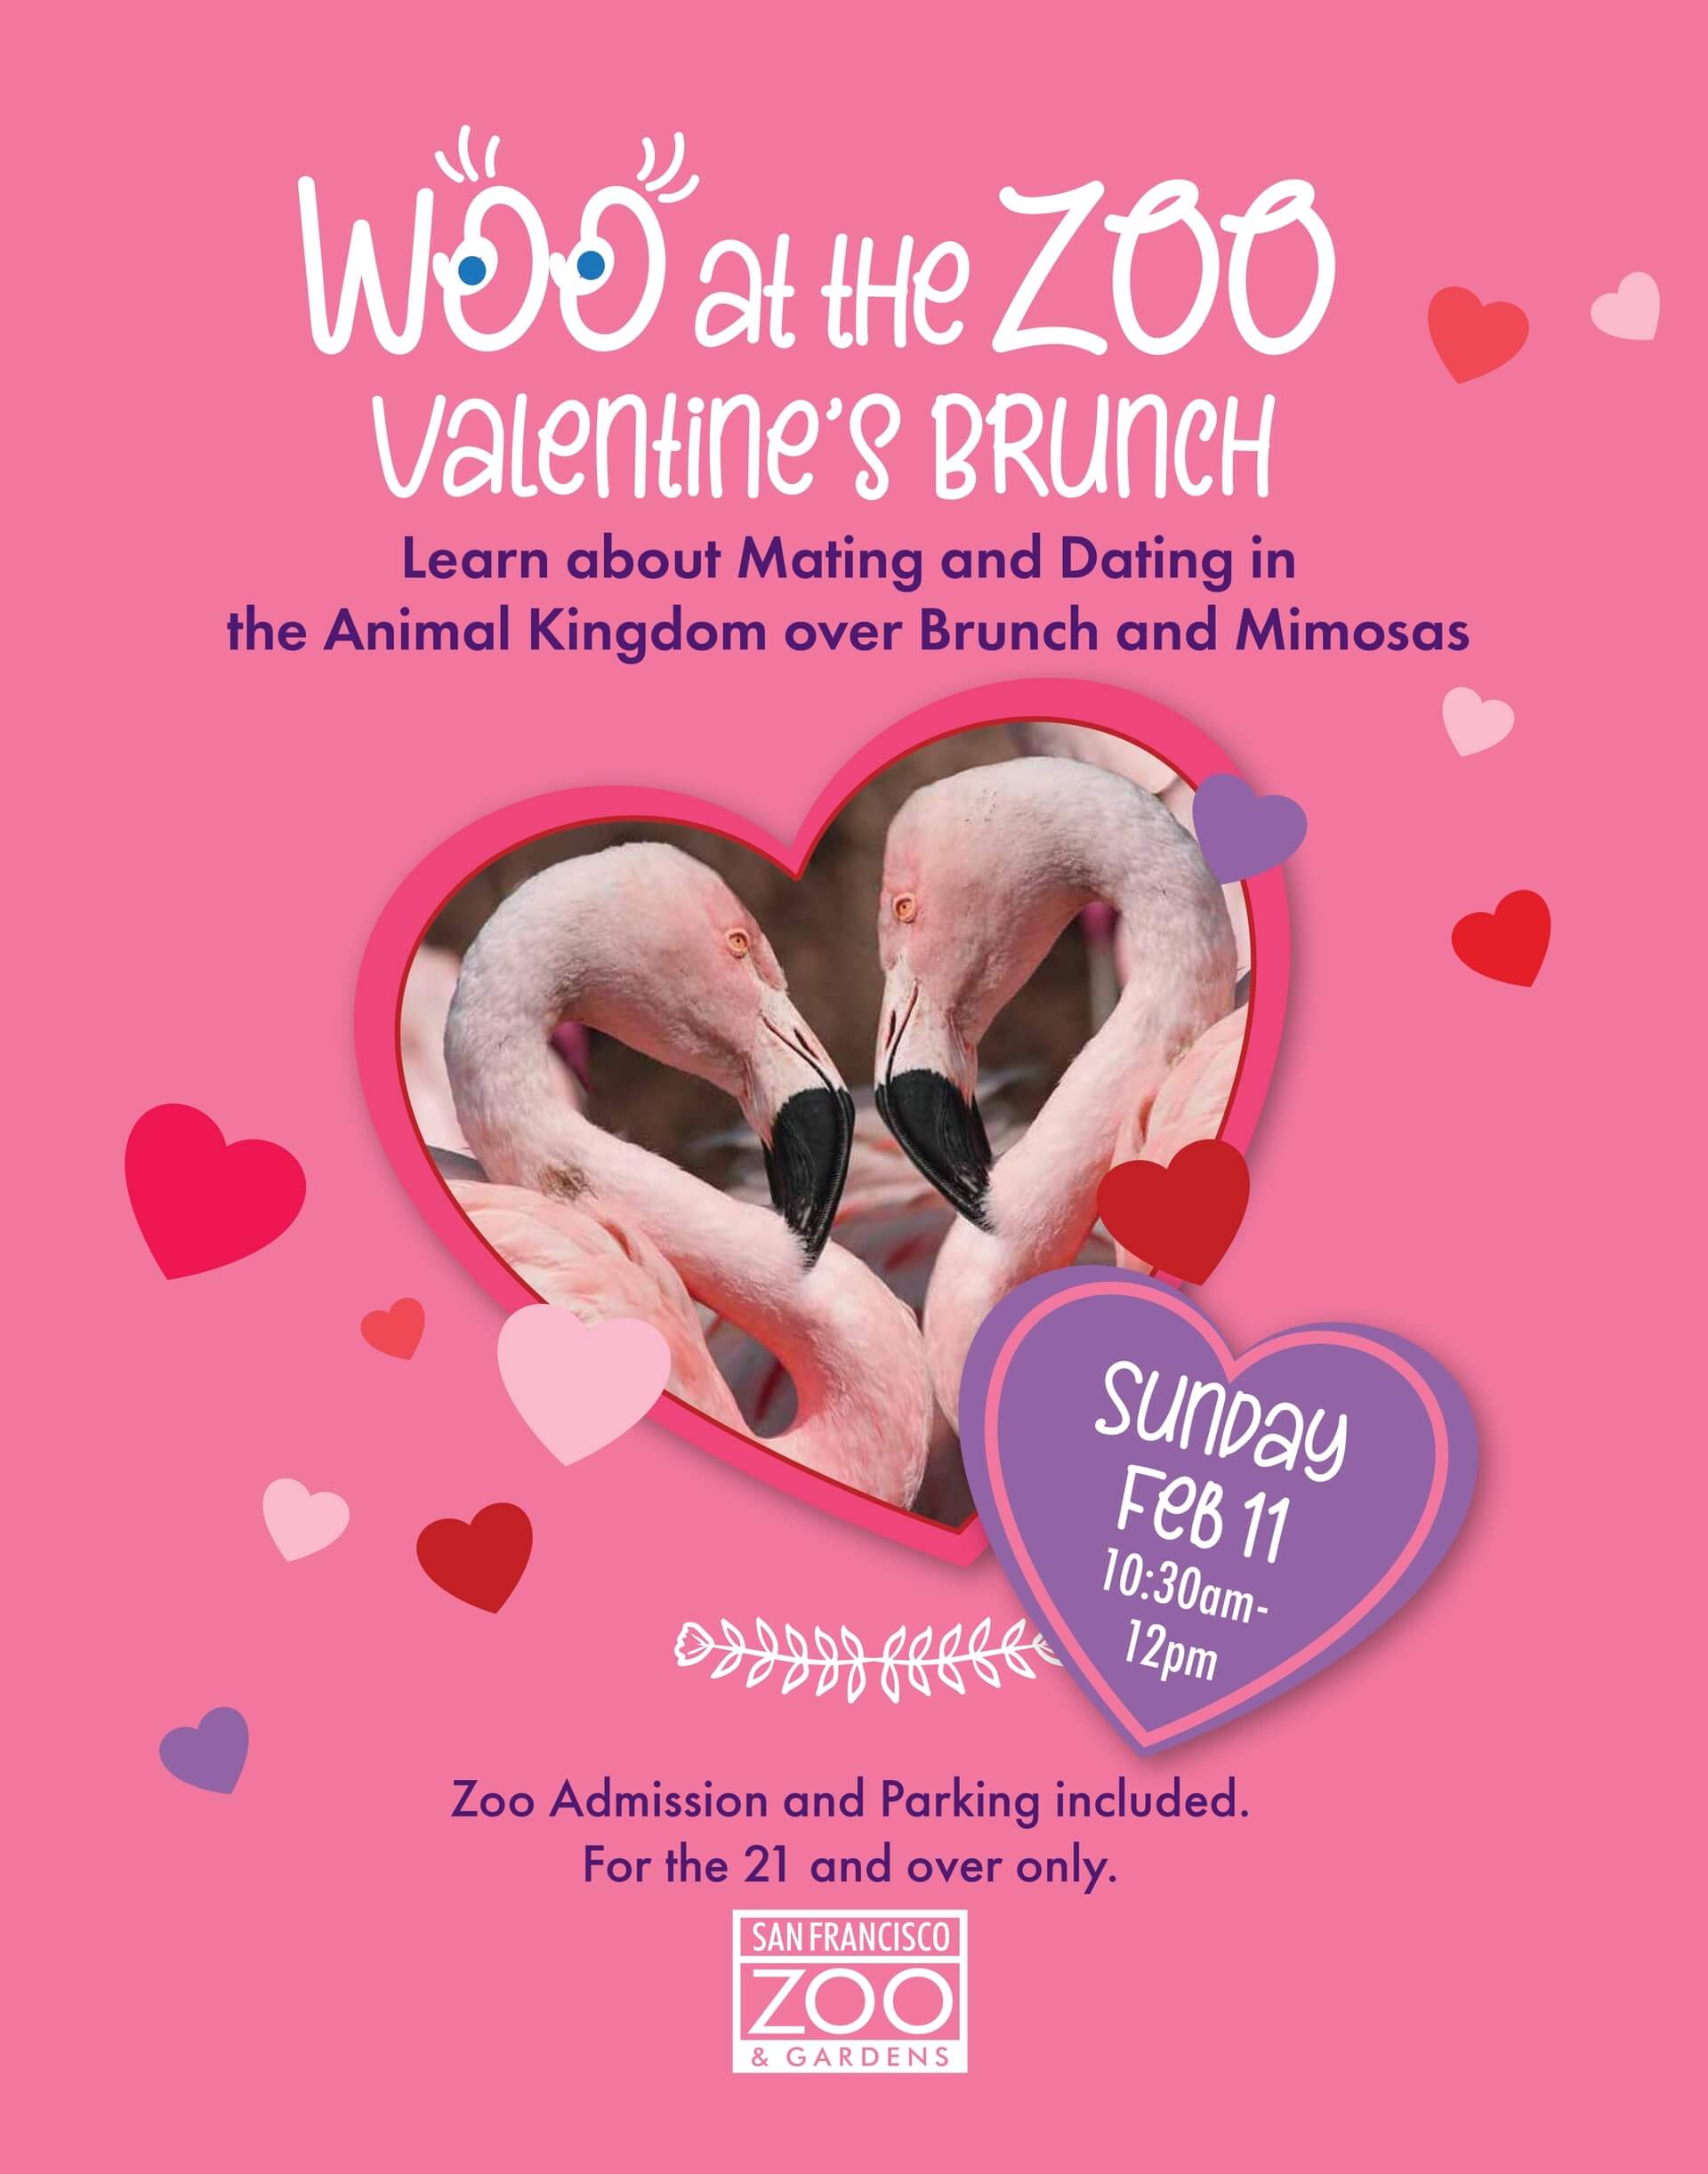 Woo at the Zoo: Valentine's Brunch